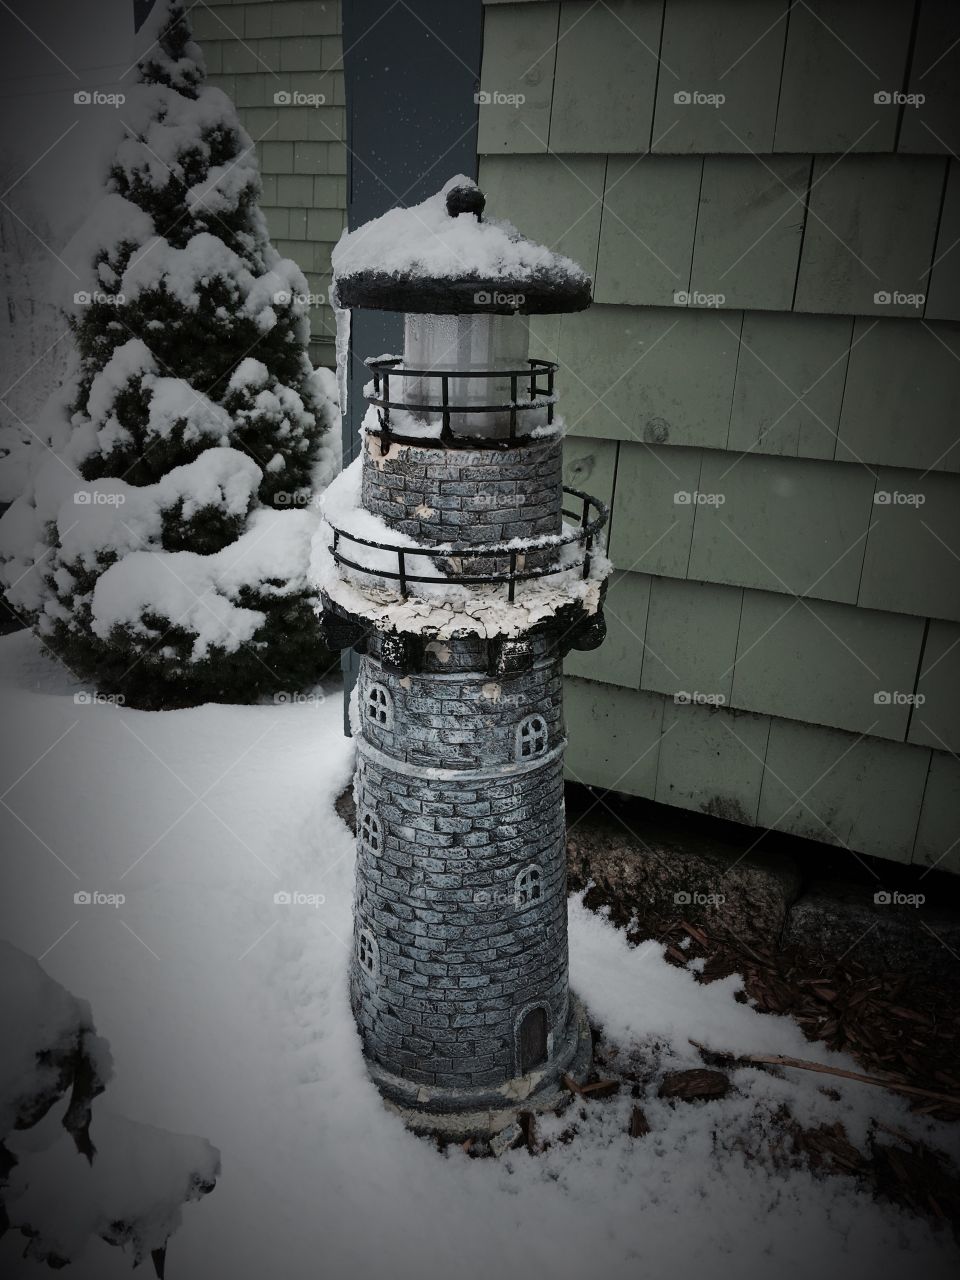 This snow and ice covered lighthouse shows the beauty of VT